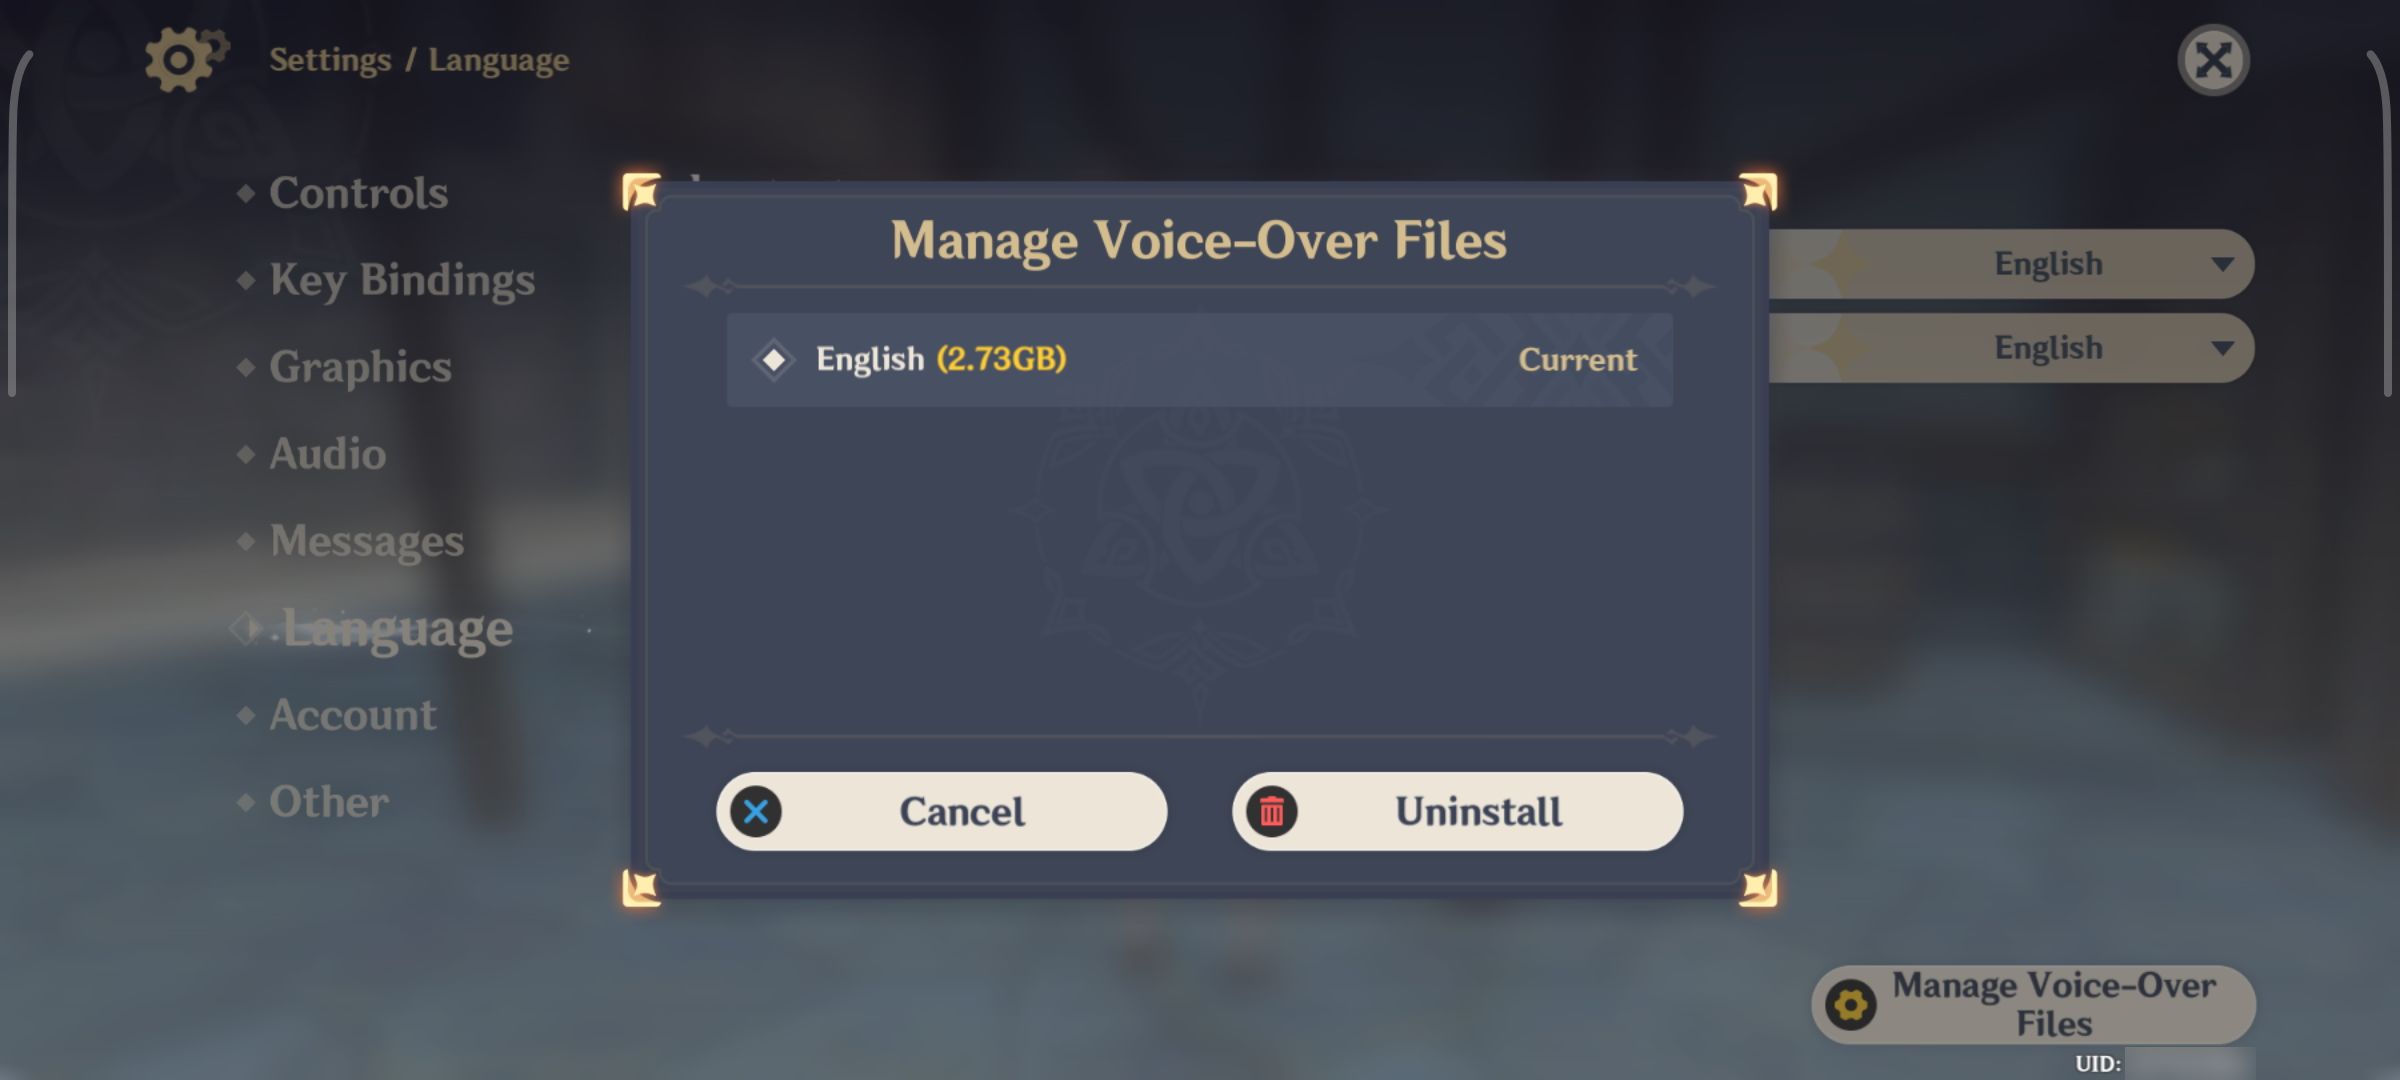 Genshin Impact manage voice-over files window for listed voice packs on Android